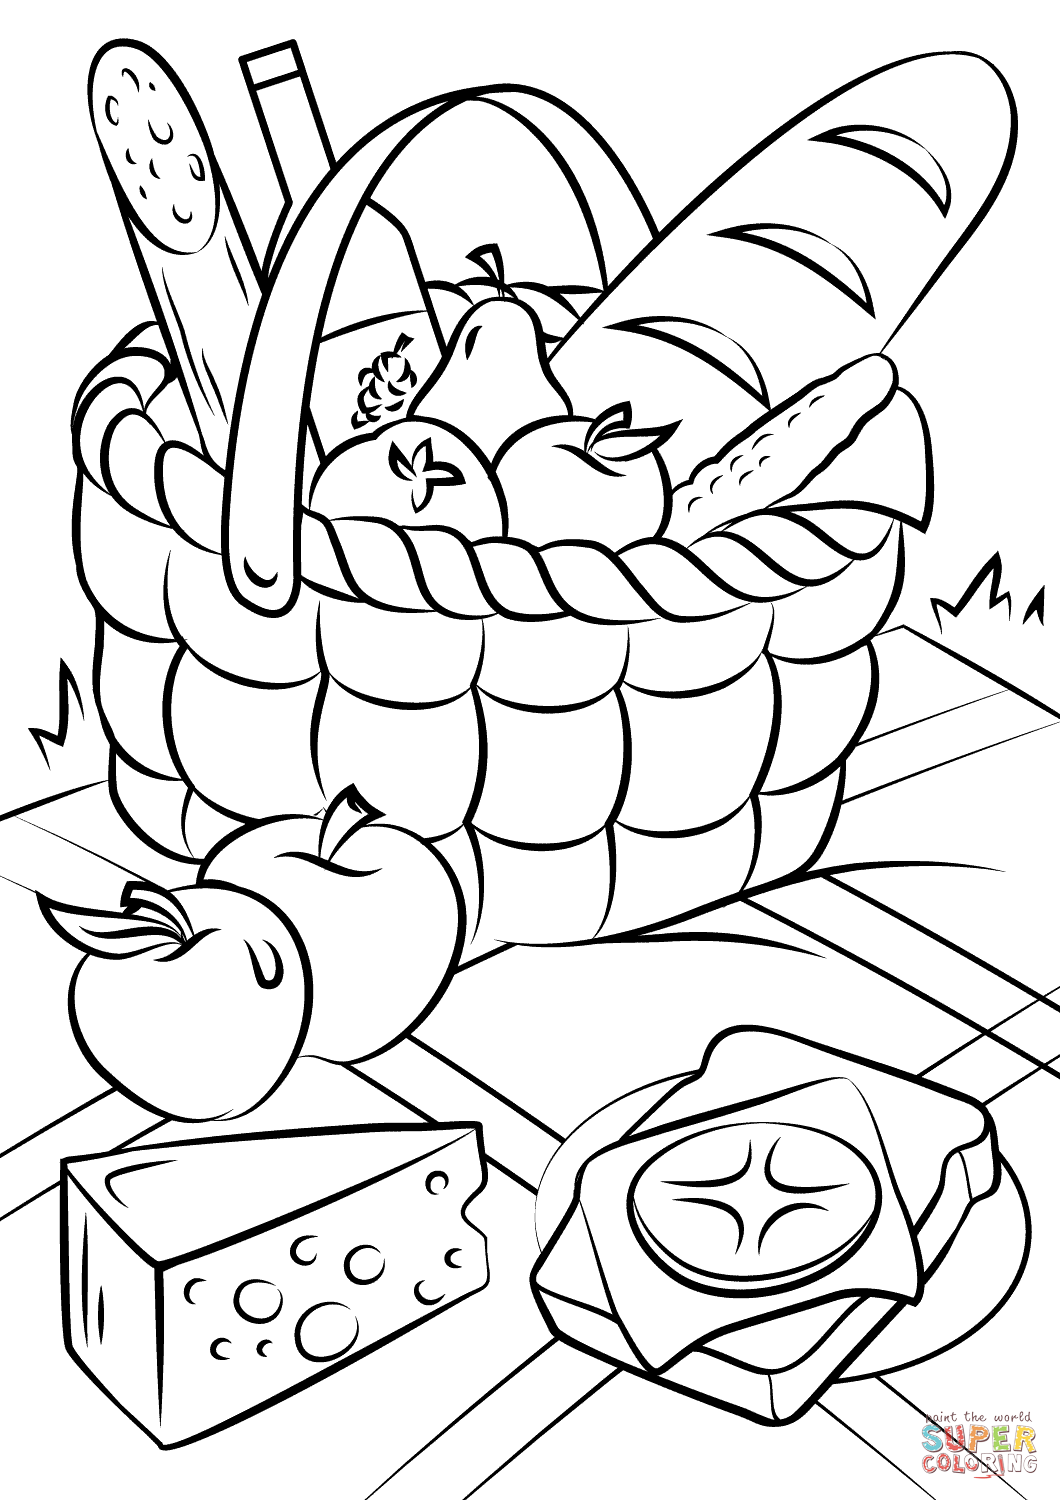 Picnic Basket Food coloring page | Free Printable Coloring Pages